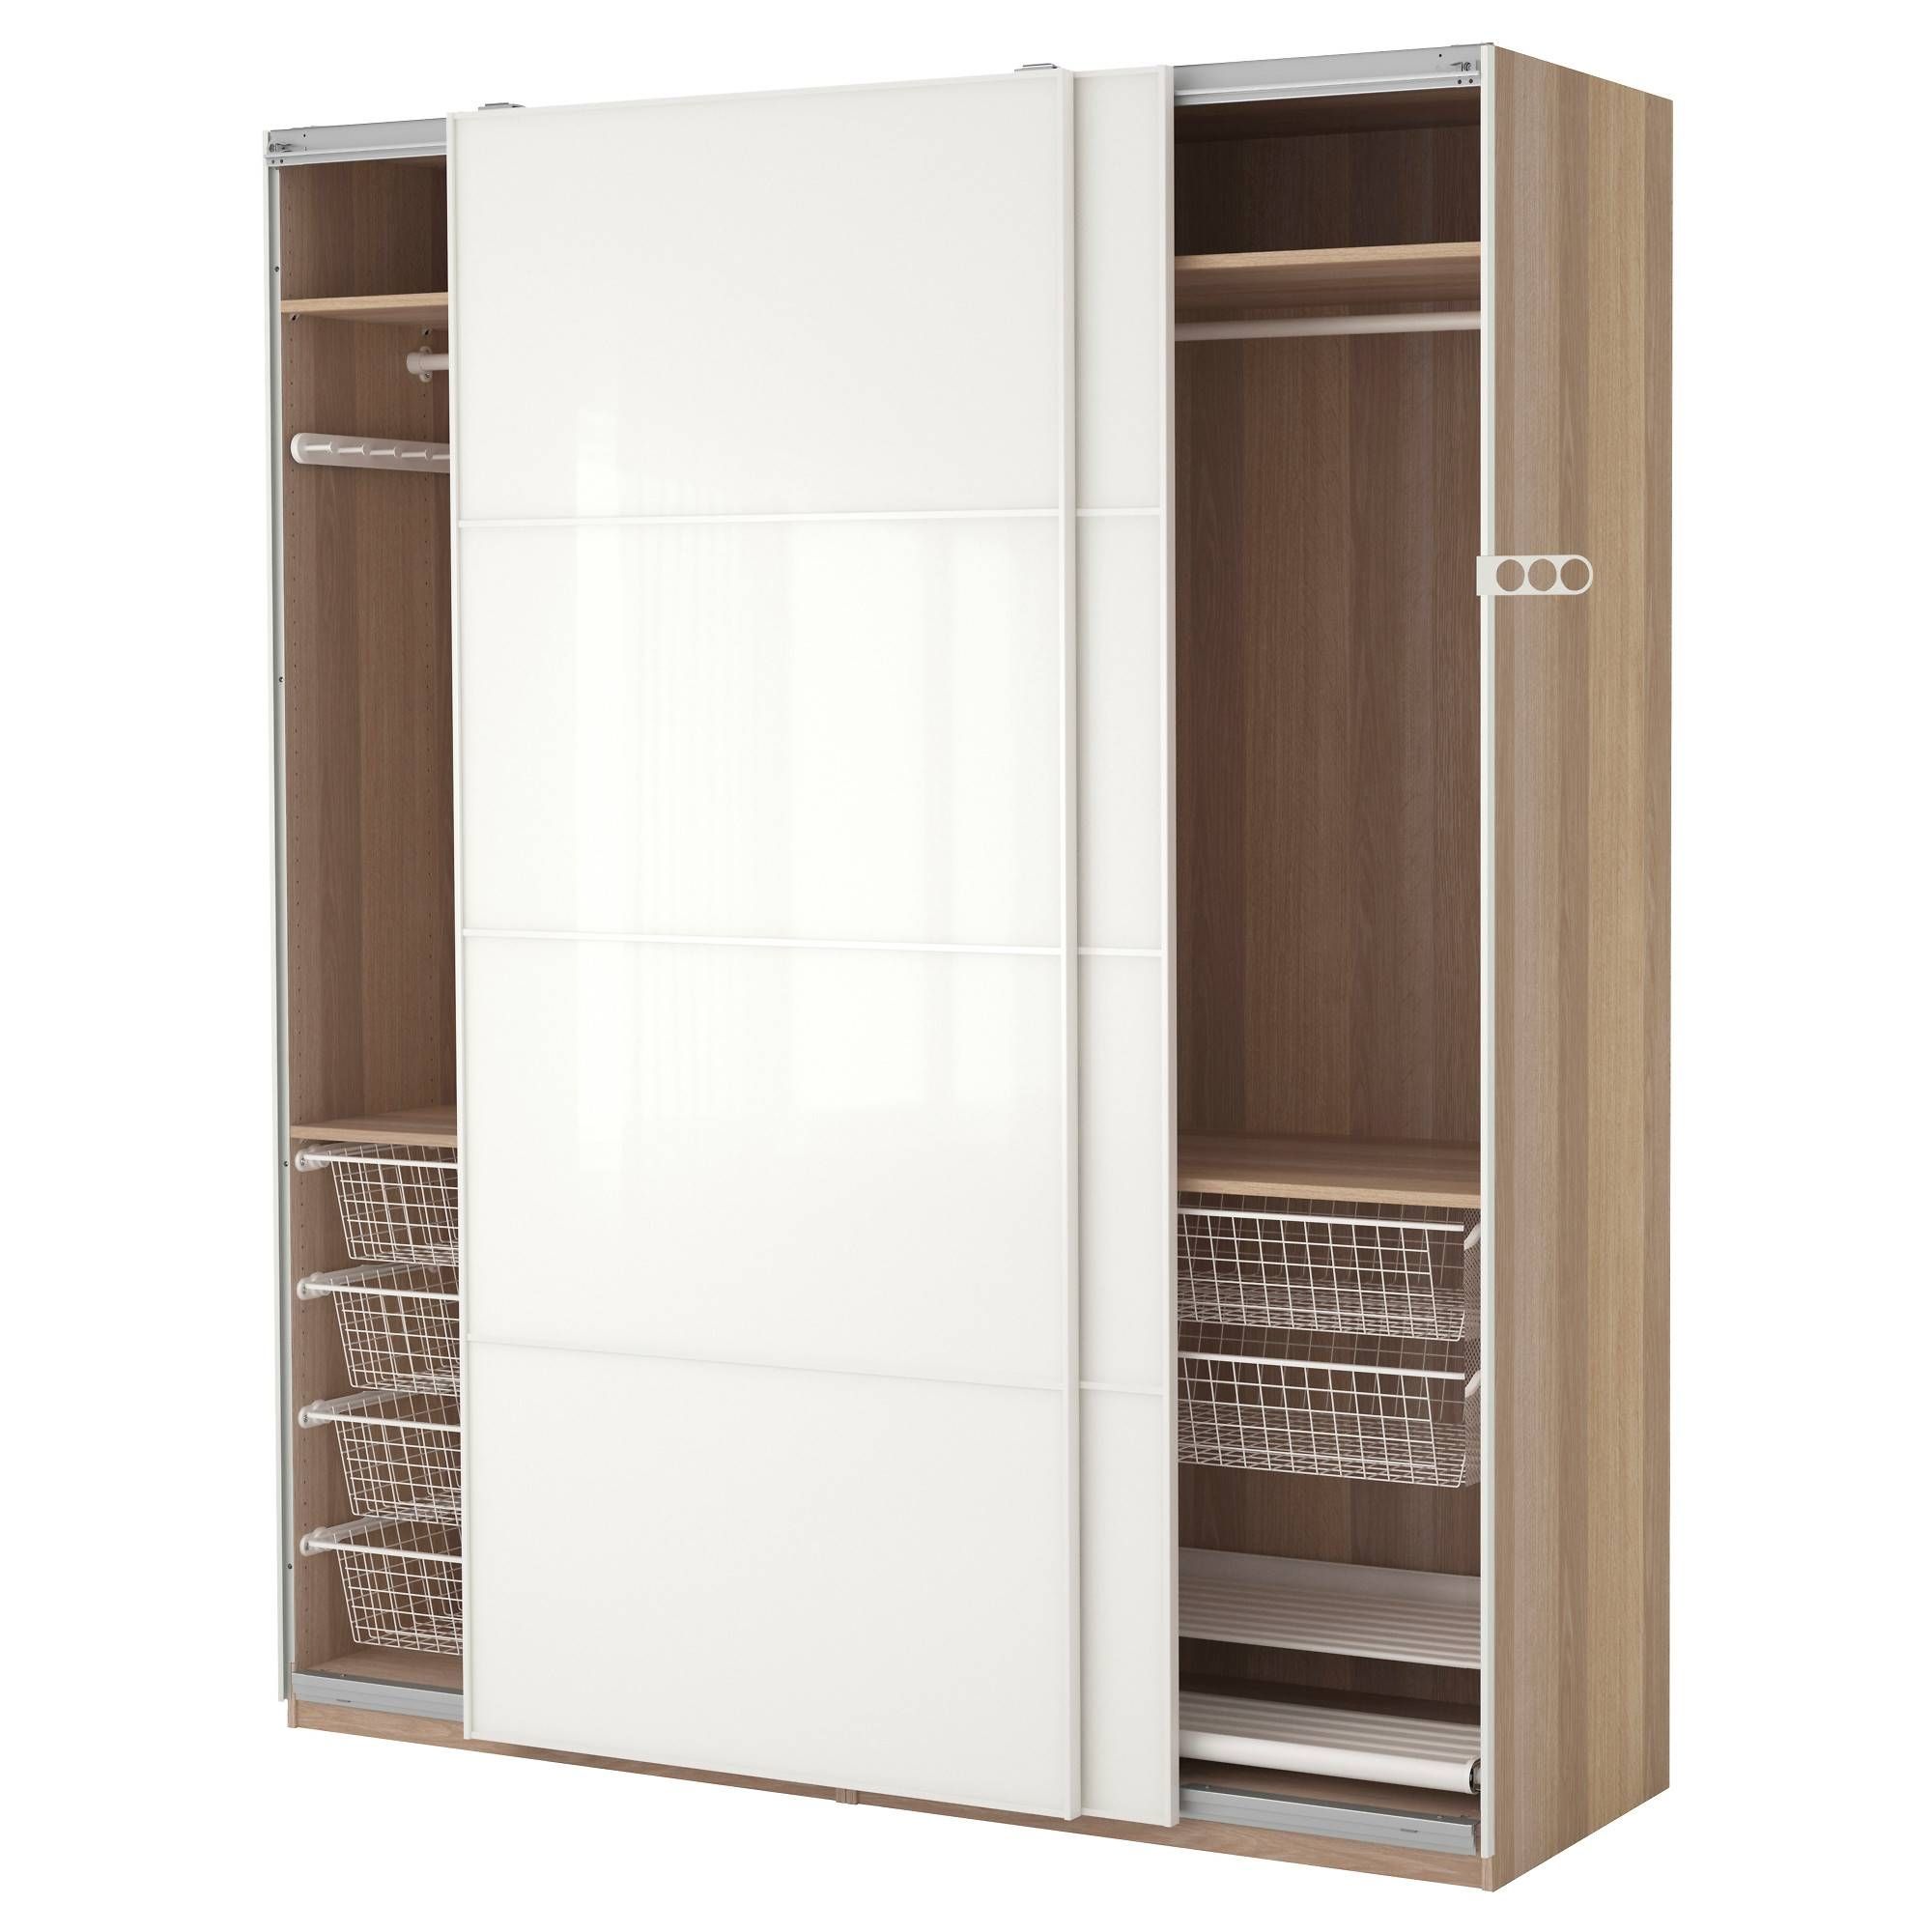 Wardrobes – Pax System & Platsa System – Ikea Intended For Double Rail Wardrobes Ikea (View 19 of 30)